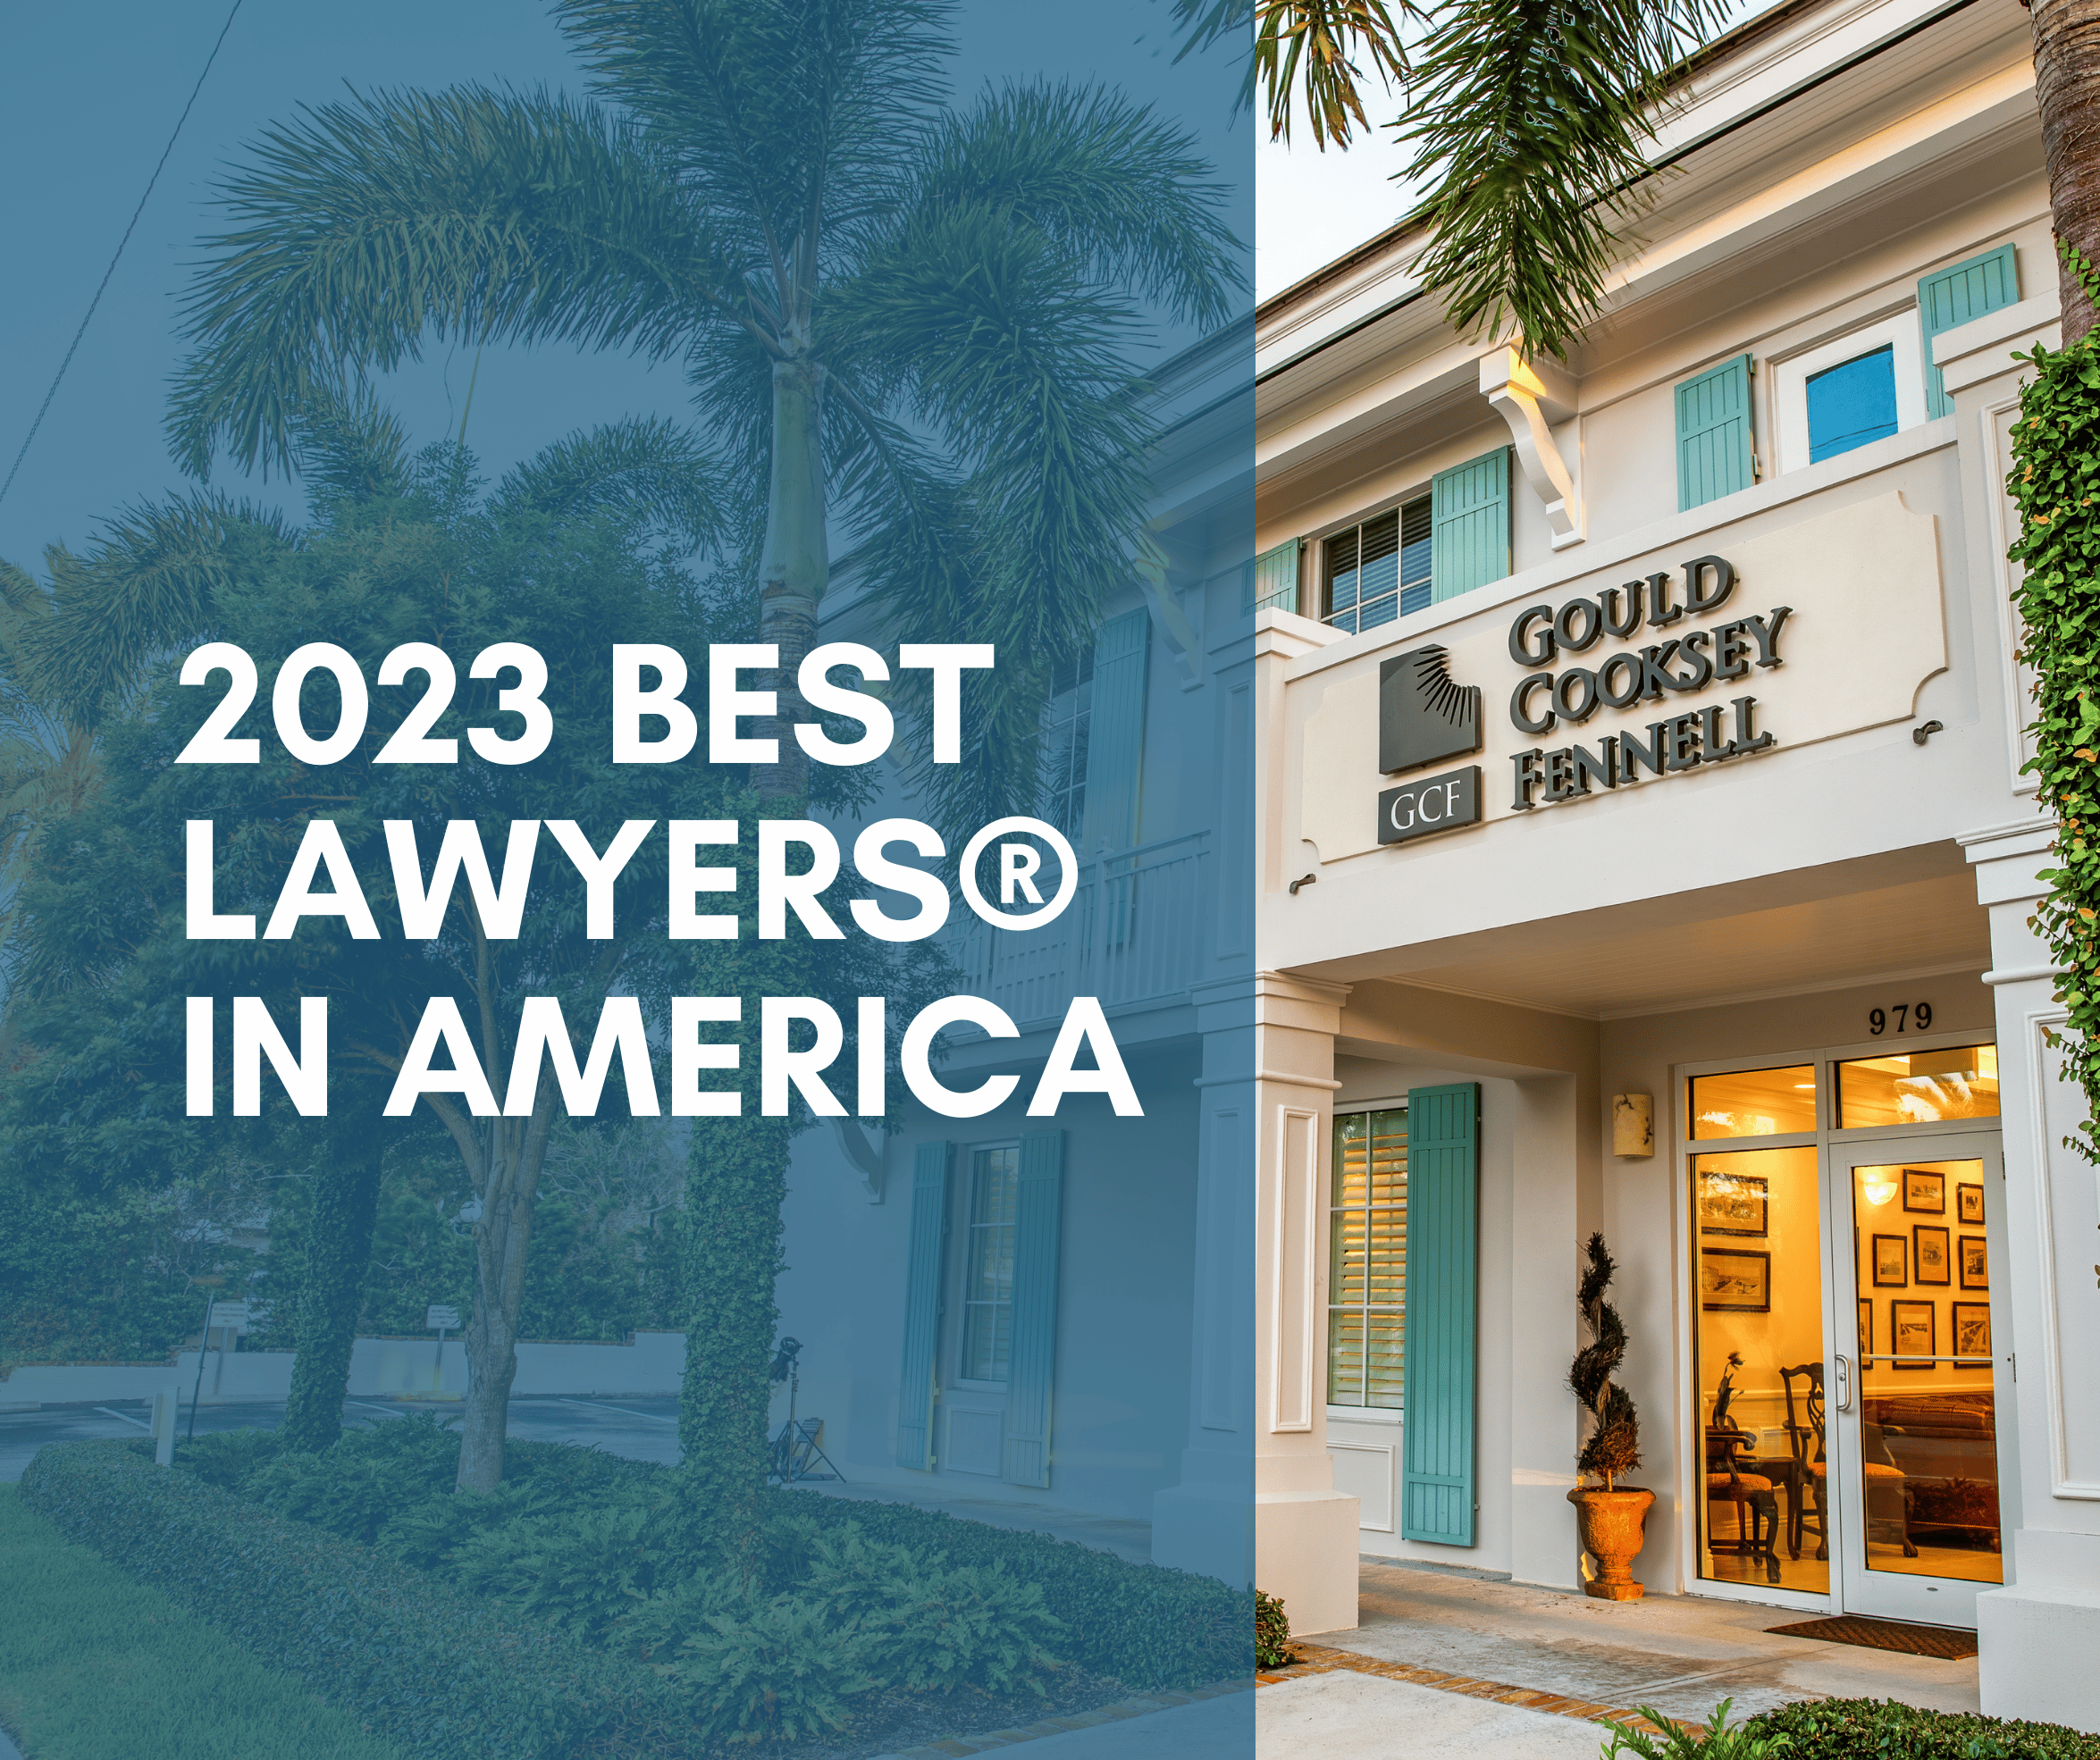 2023 Best Lawyers in America with Gould Cooksey Fennell buidling